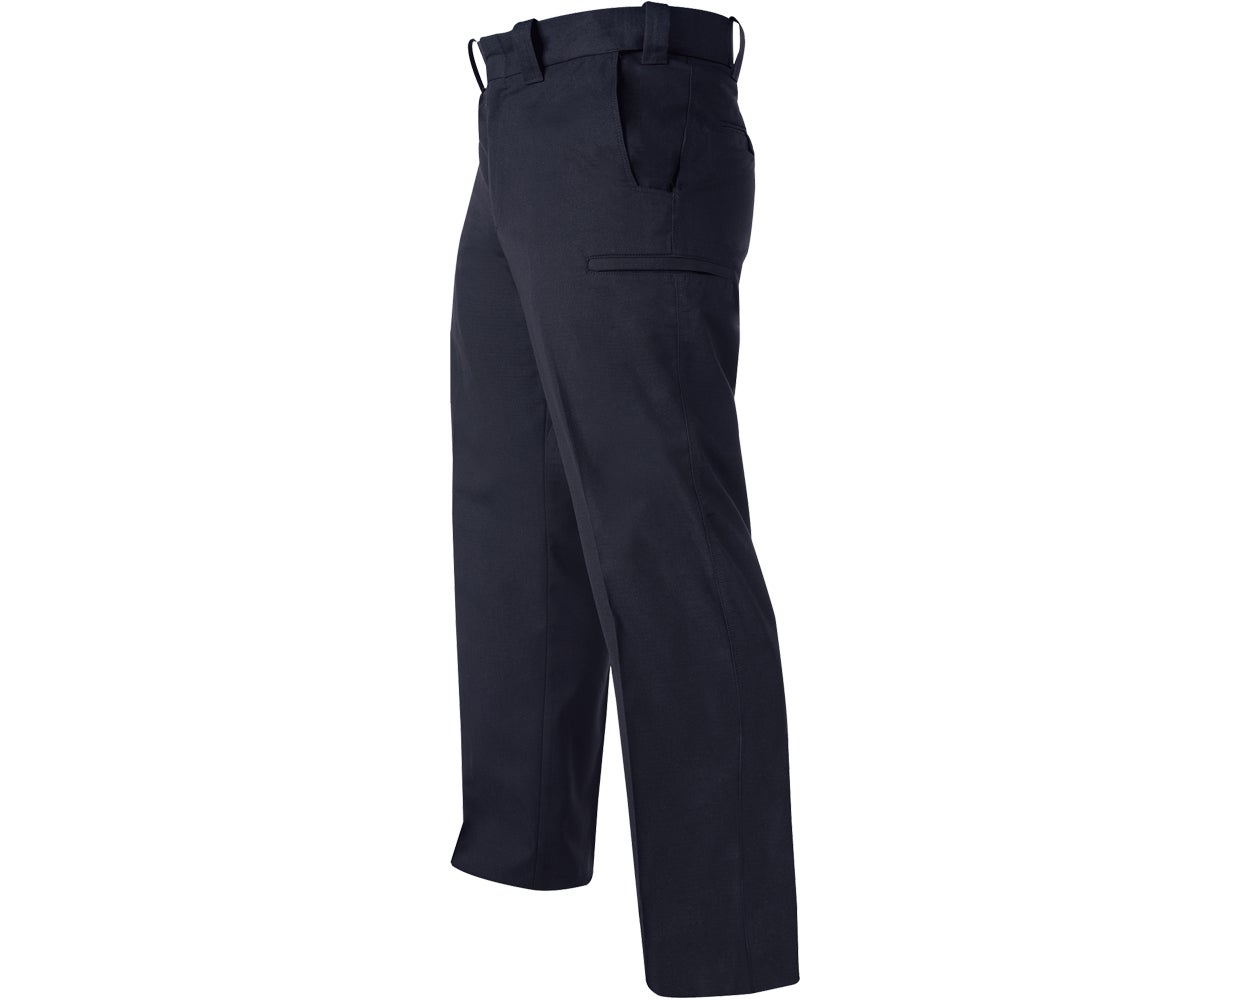 Flying Cross FX STAT Women's Class A Uniform Pants with 6 Pockets FX77400W - Newest Products